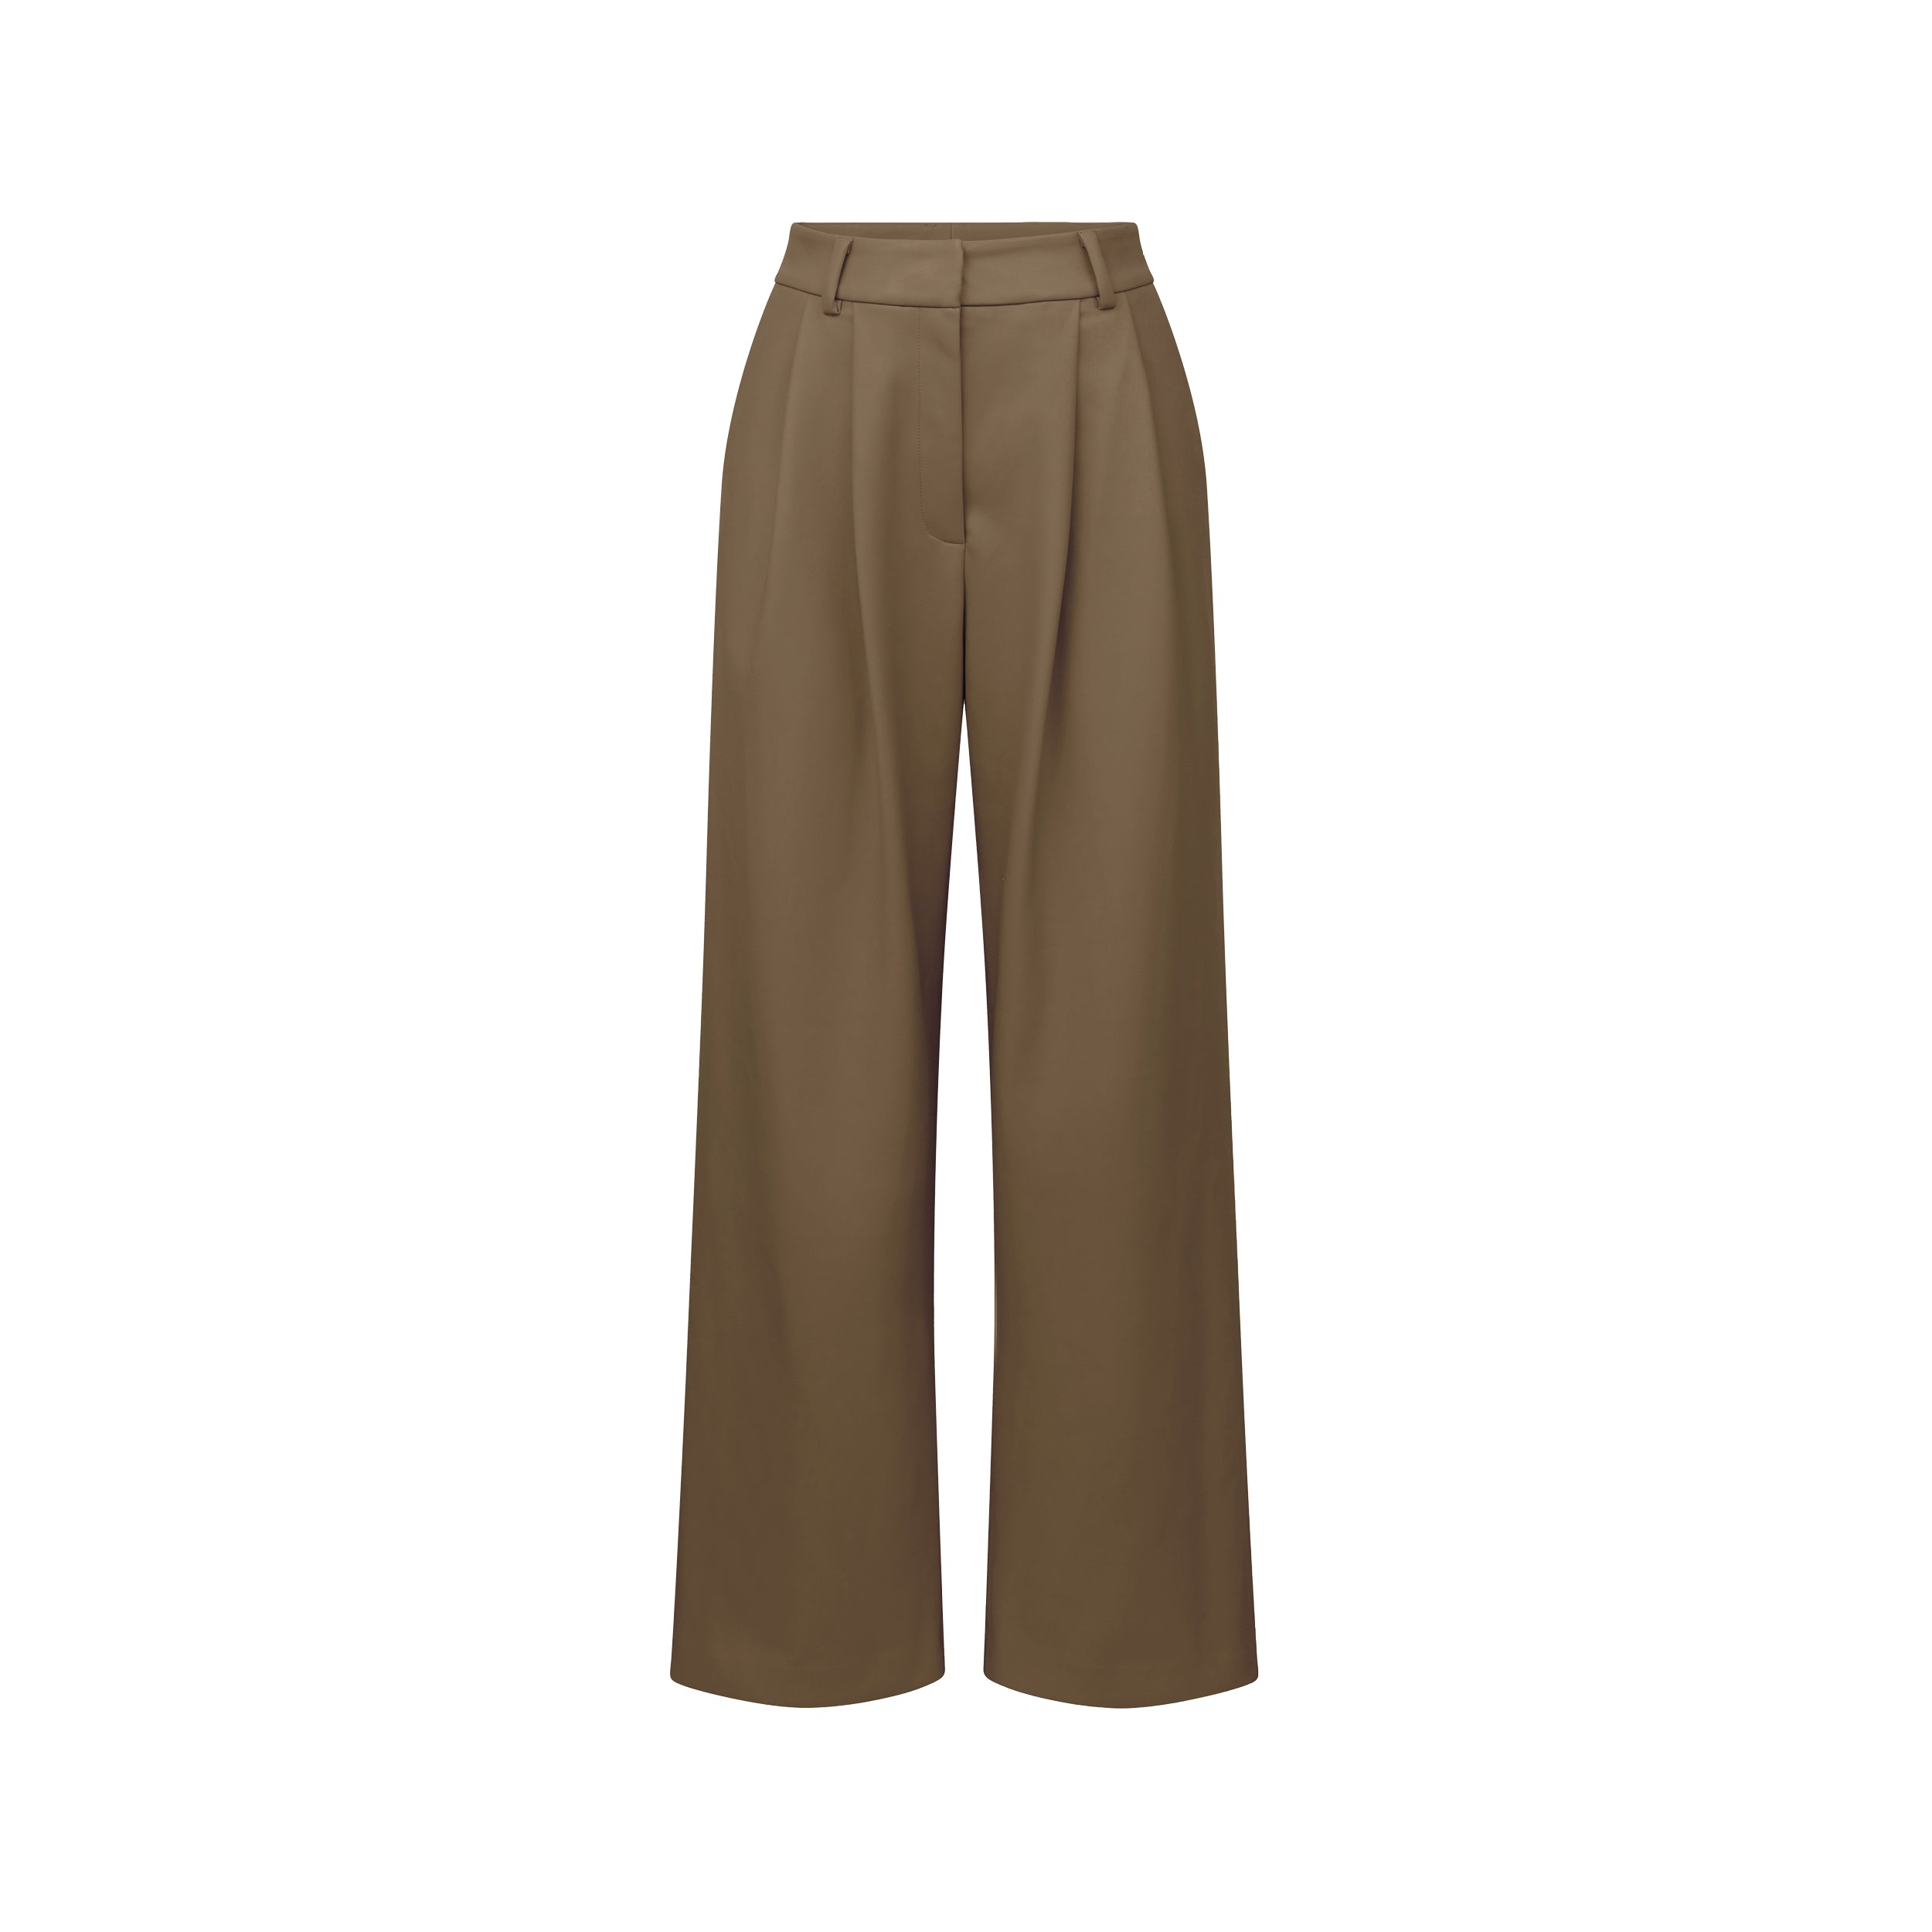 Product shot of pleated high rise faux leather brown trouser.